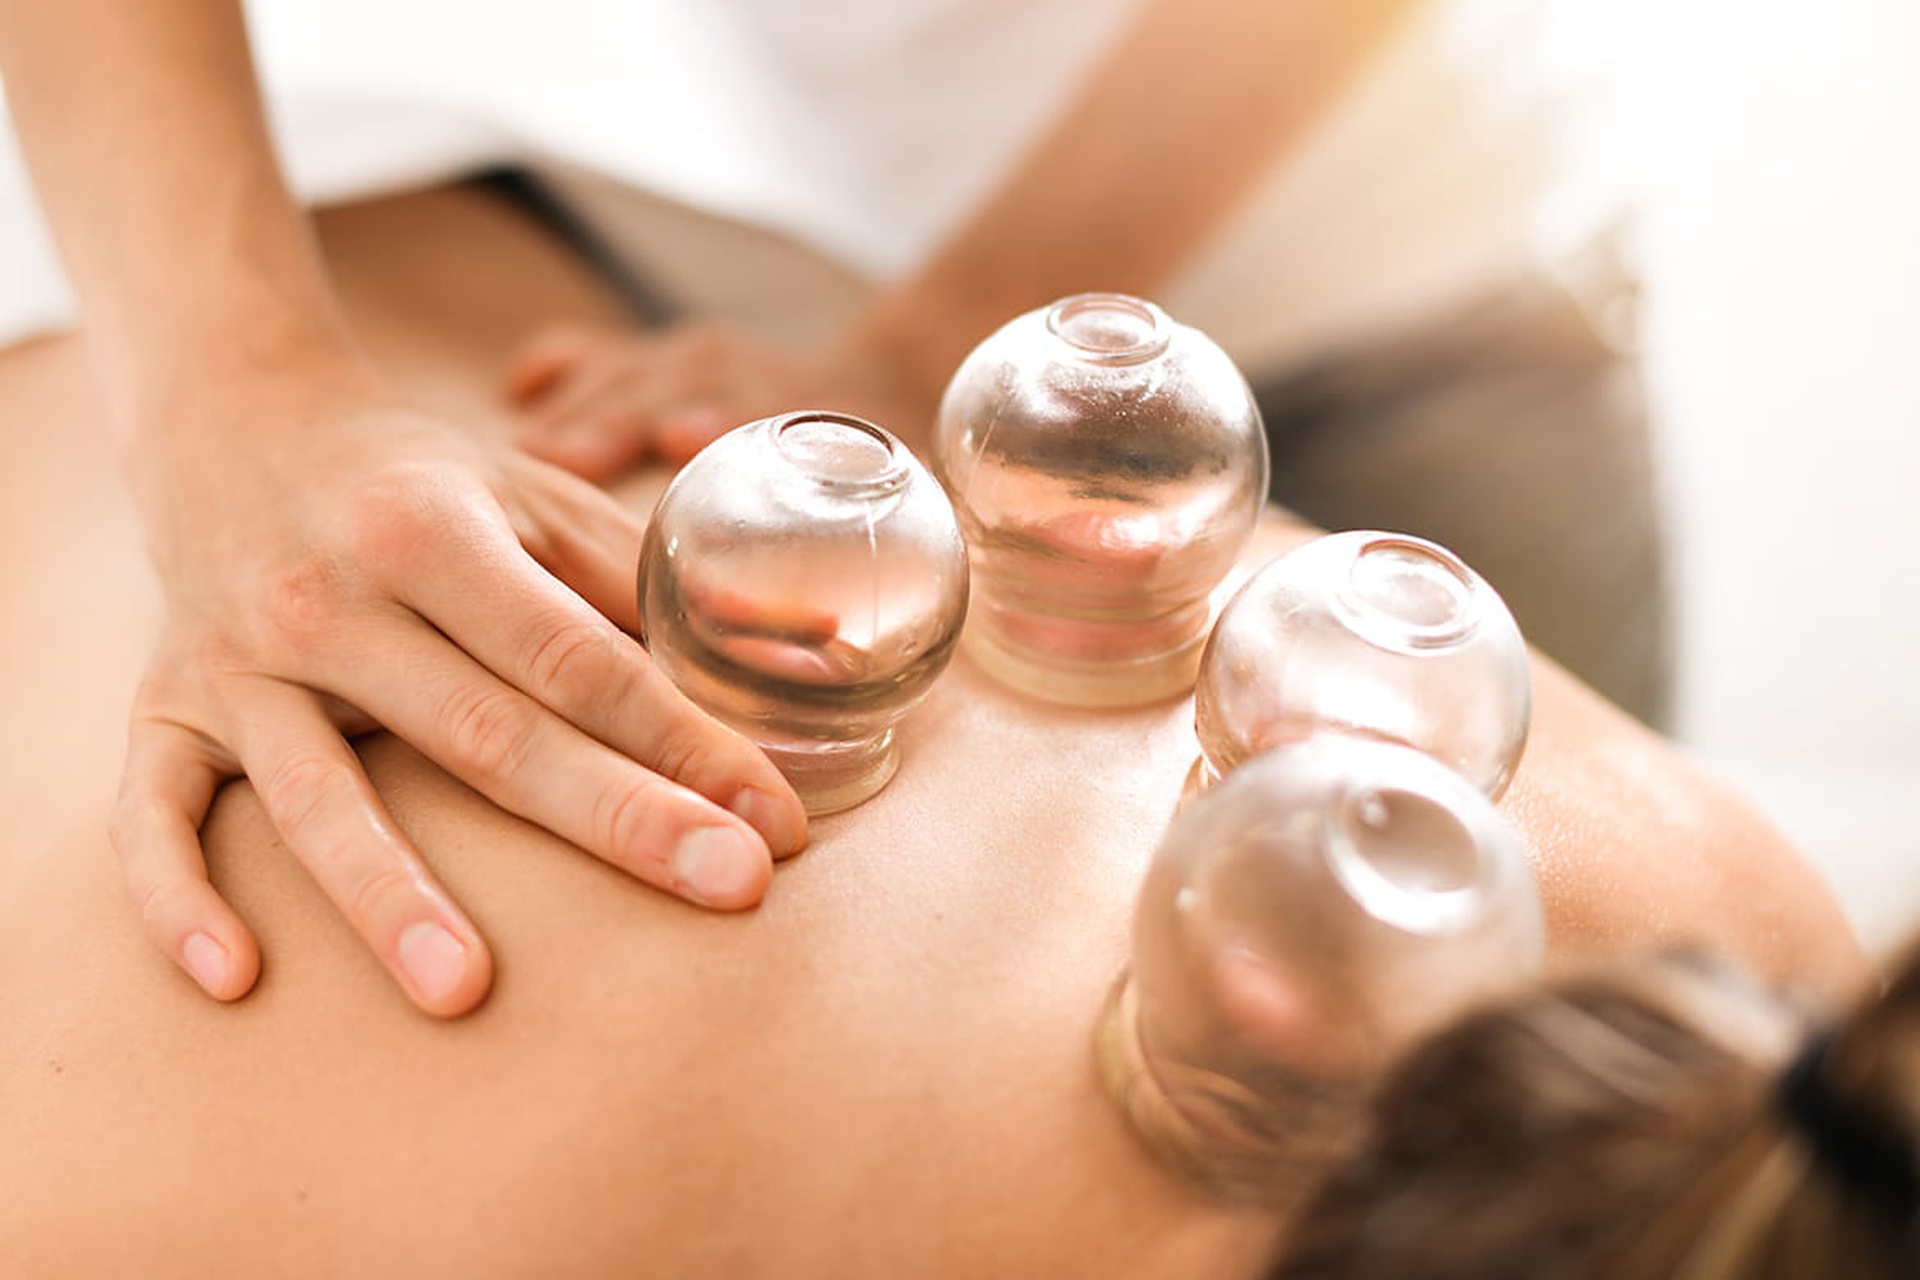 is cupping therapy safe? Guidelines for ensuring safety